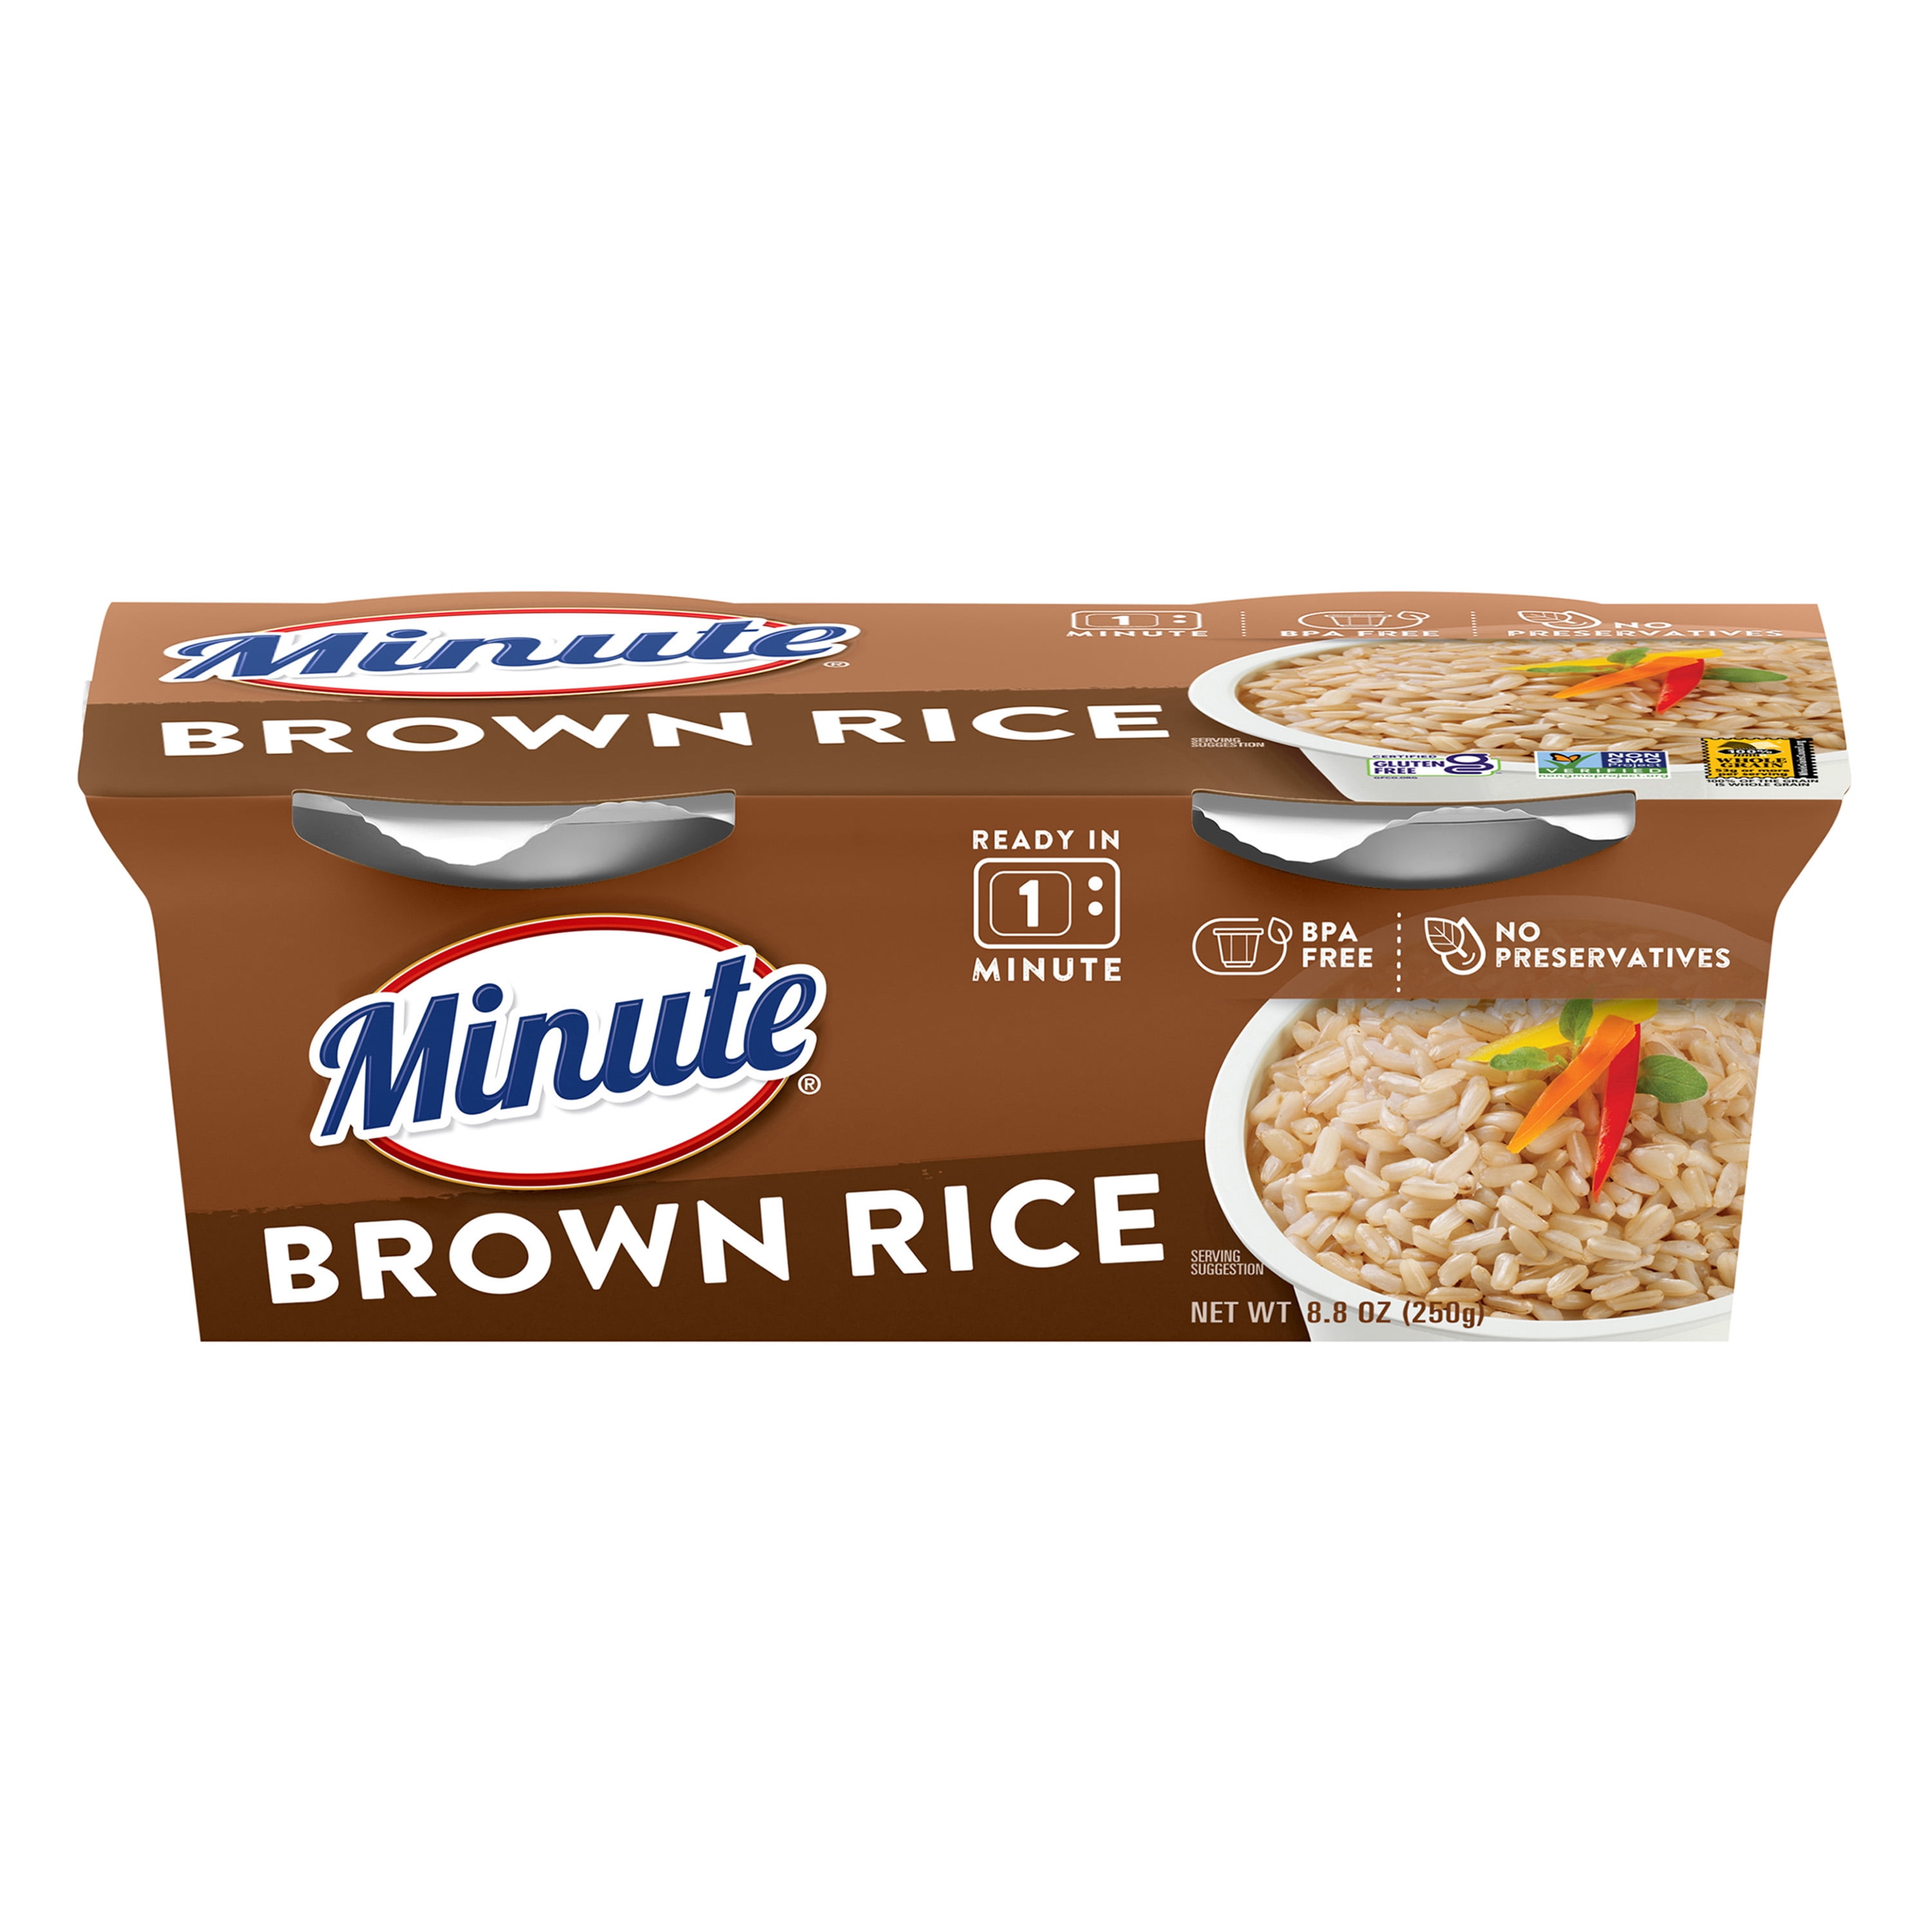 Minute Brown Rice, Microwaveable Rice Cups, 4.4 oz, 2 Ct